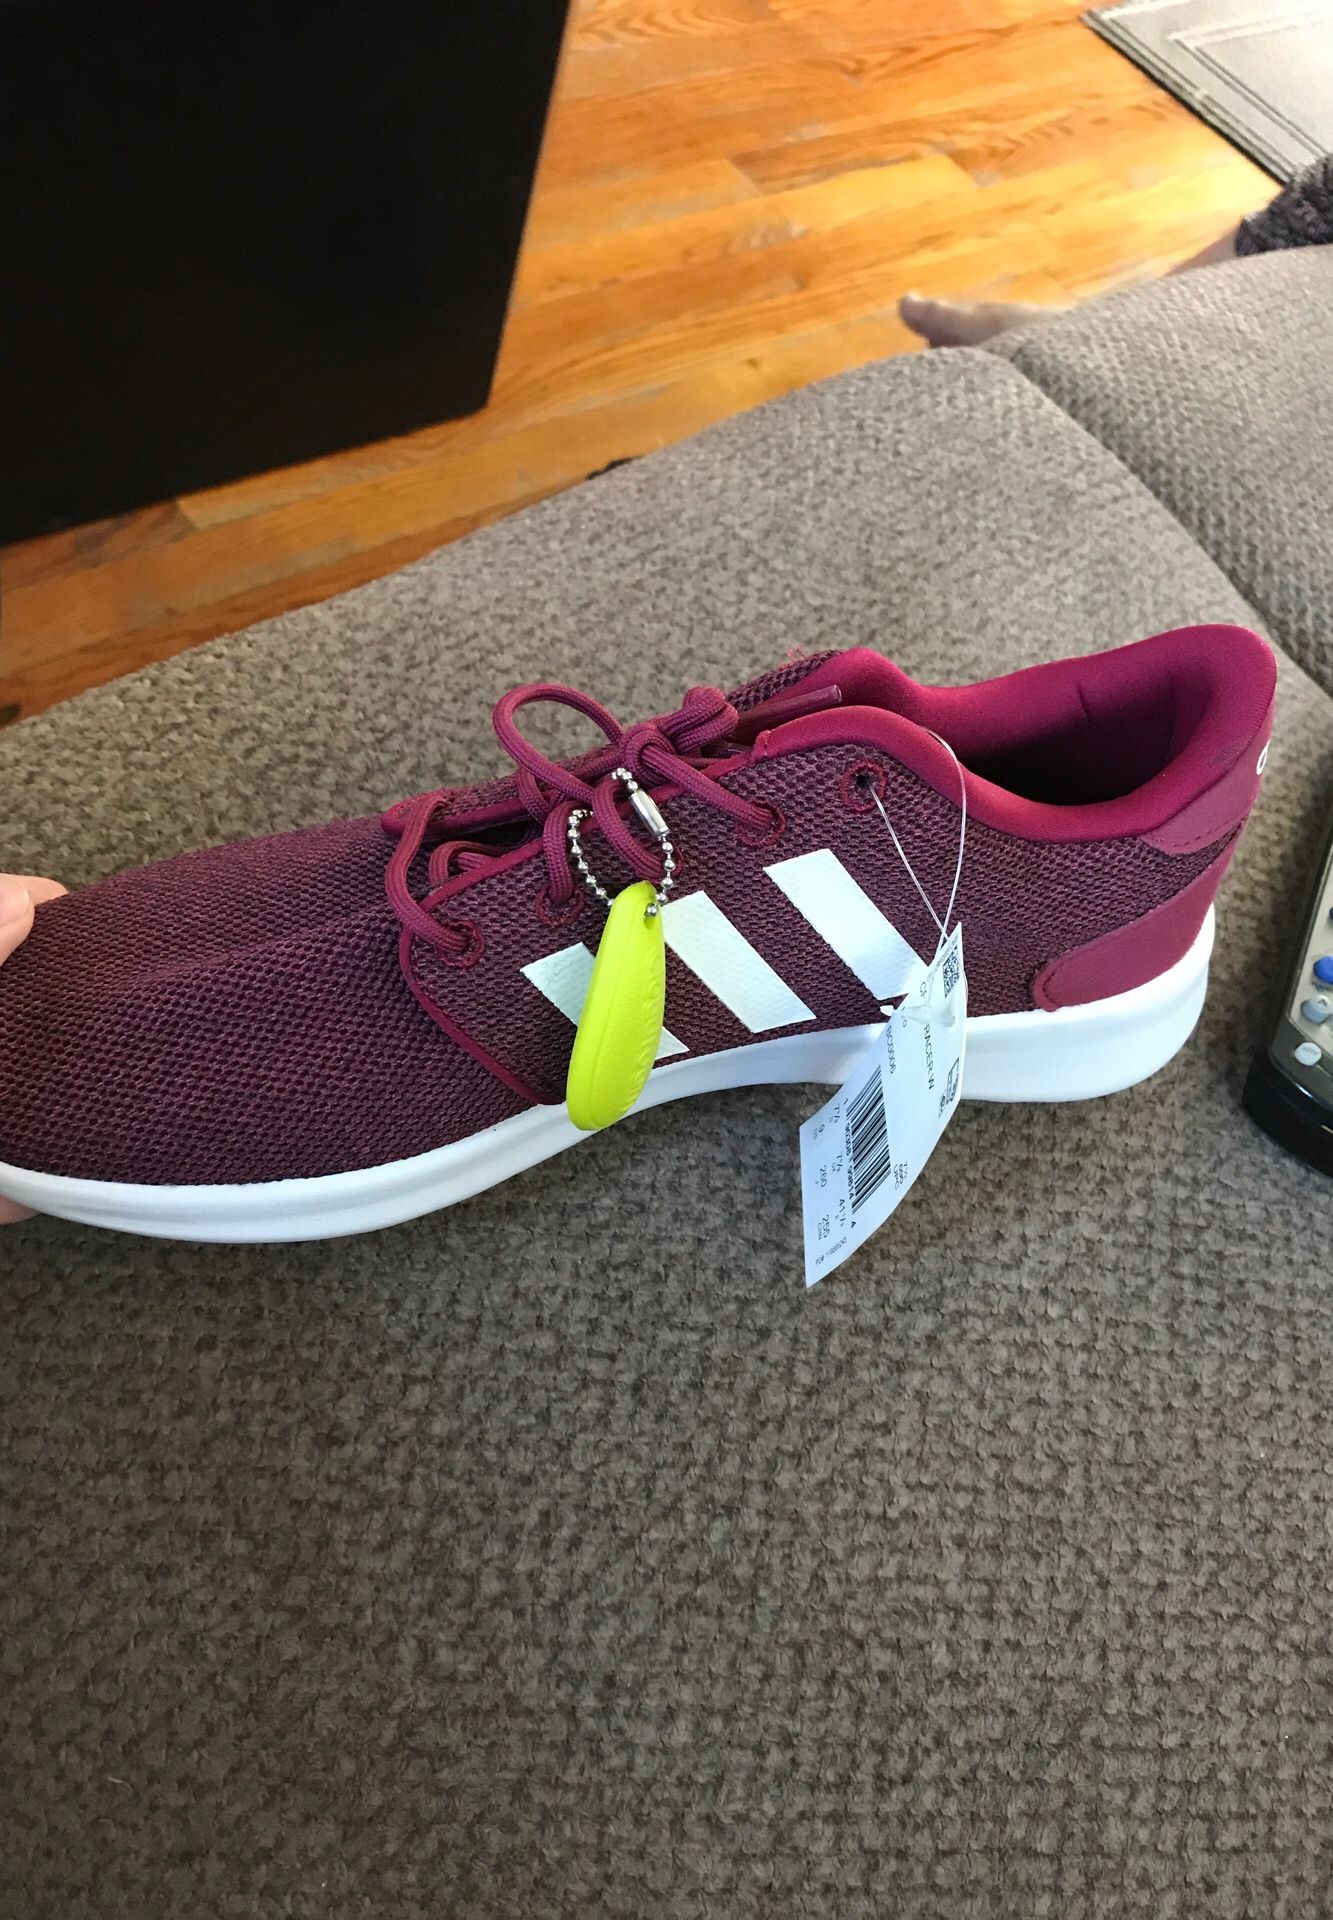 Cash only $45 Adidas Neo Burgundy shoes. 100% new, never used. Size 9 in women’s